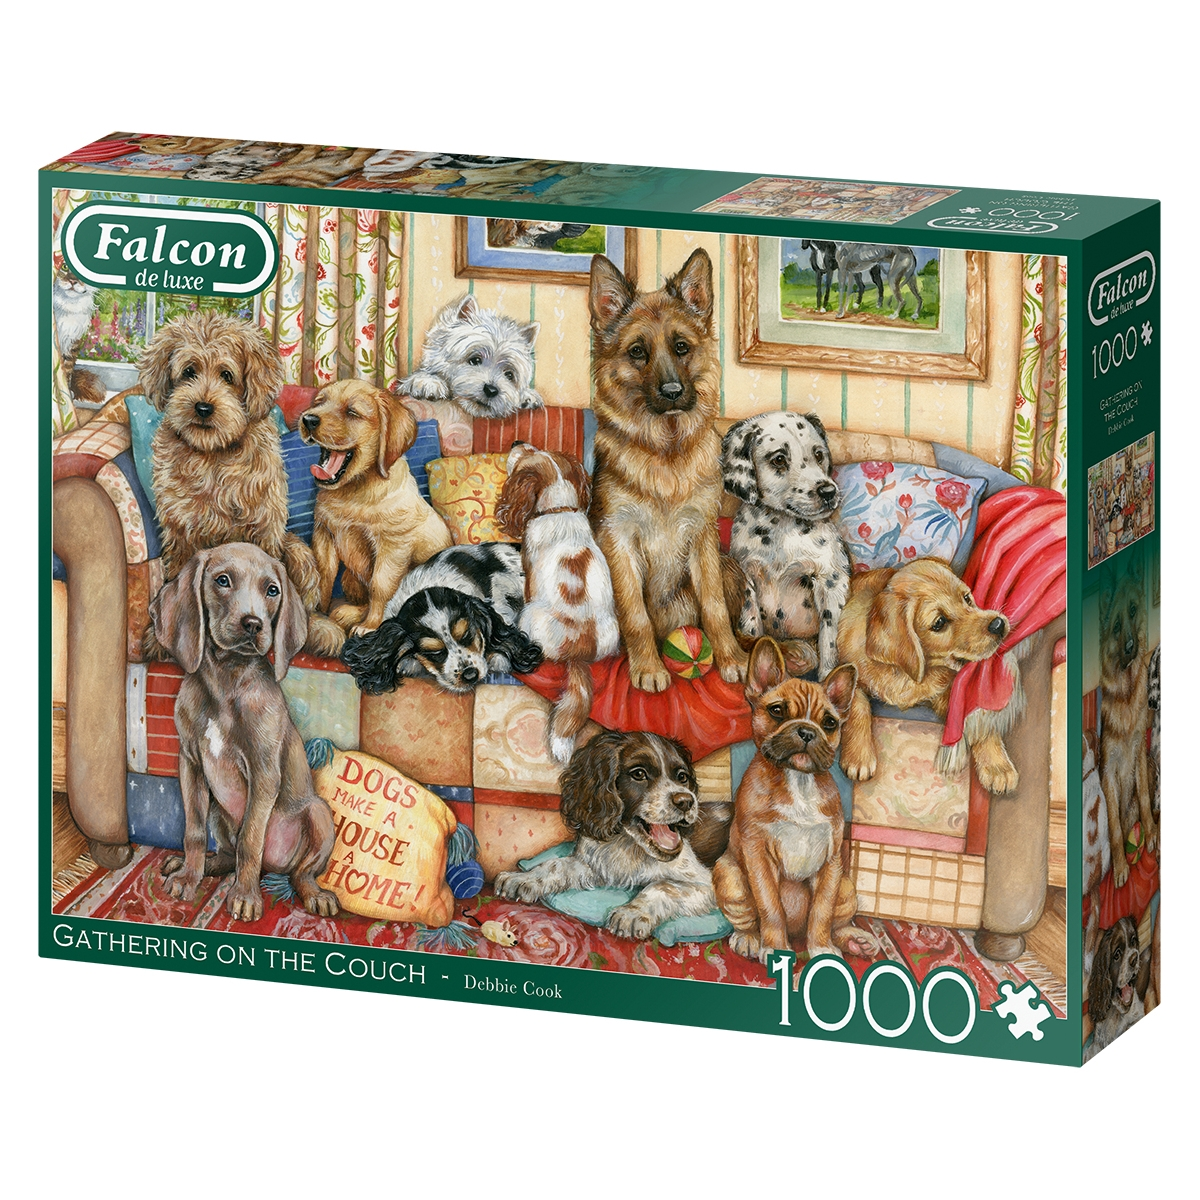 FALCON Jumbo 11293 Gathering on The Couch-1000 Teile Zubehör, Dog Mehrfarben Puzzle